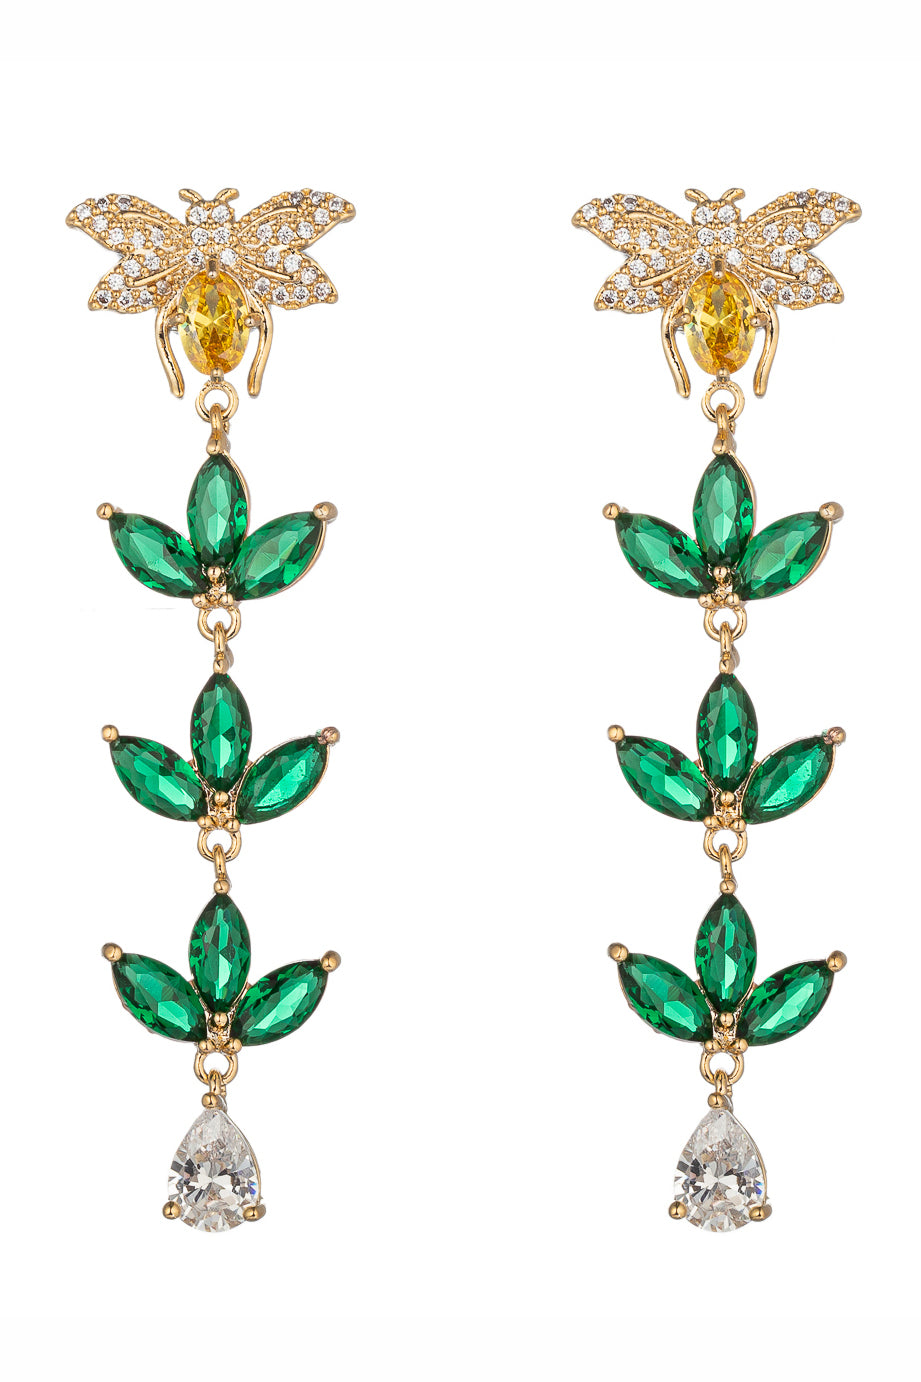 Gold tone brass bee pendant drop earrings studded with green and gold CZ crystals.